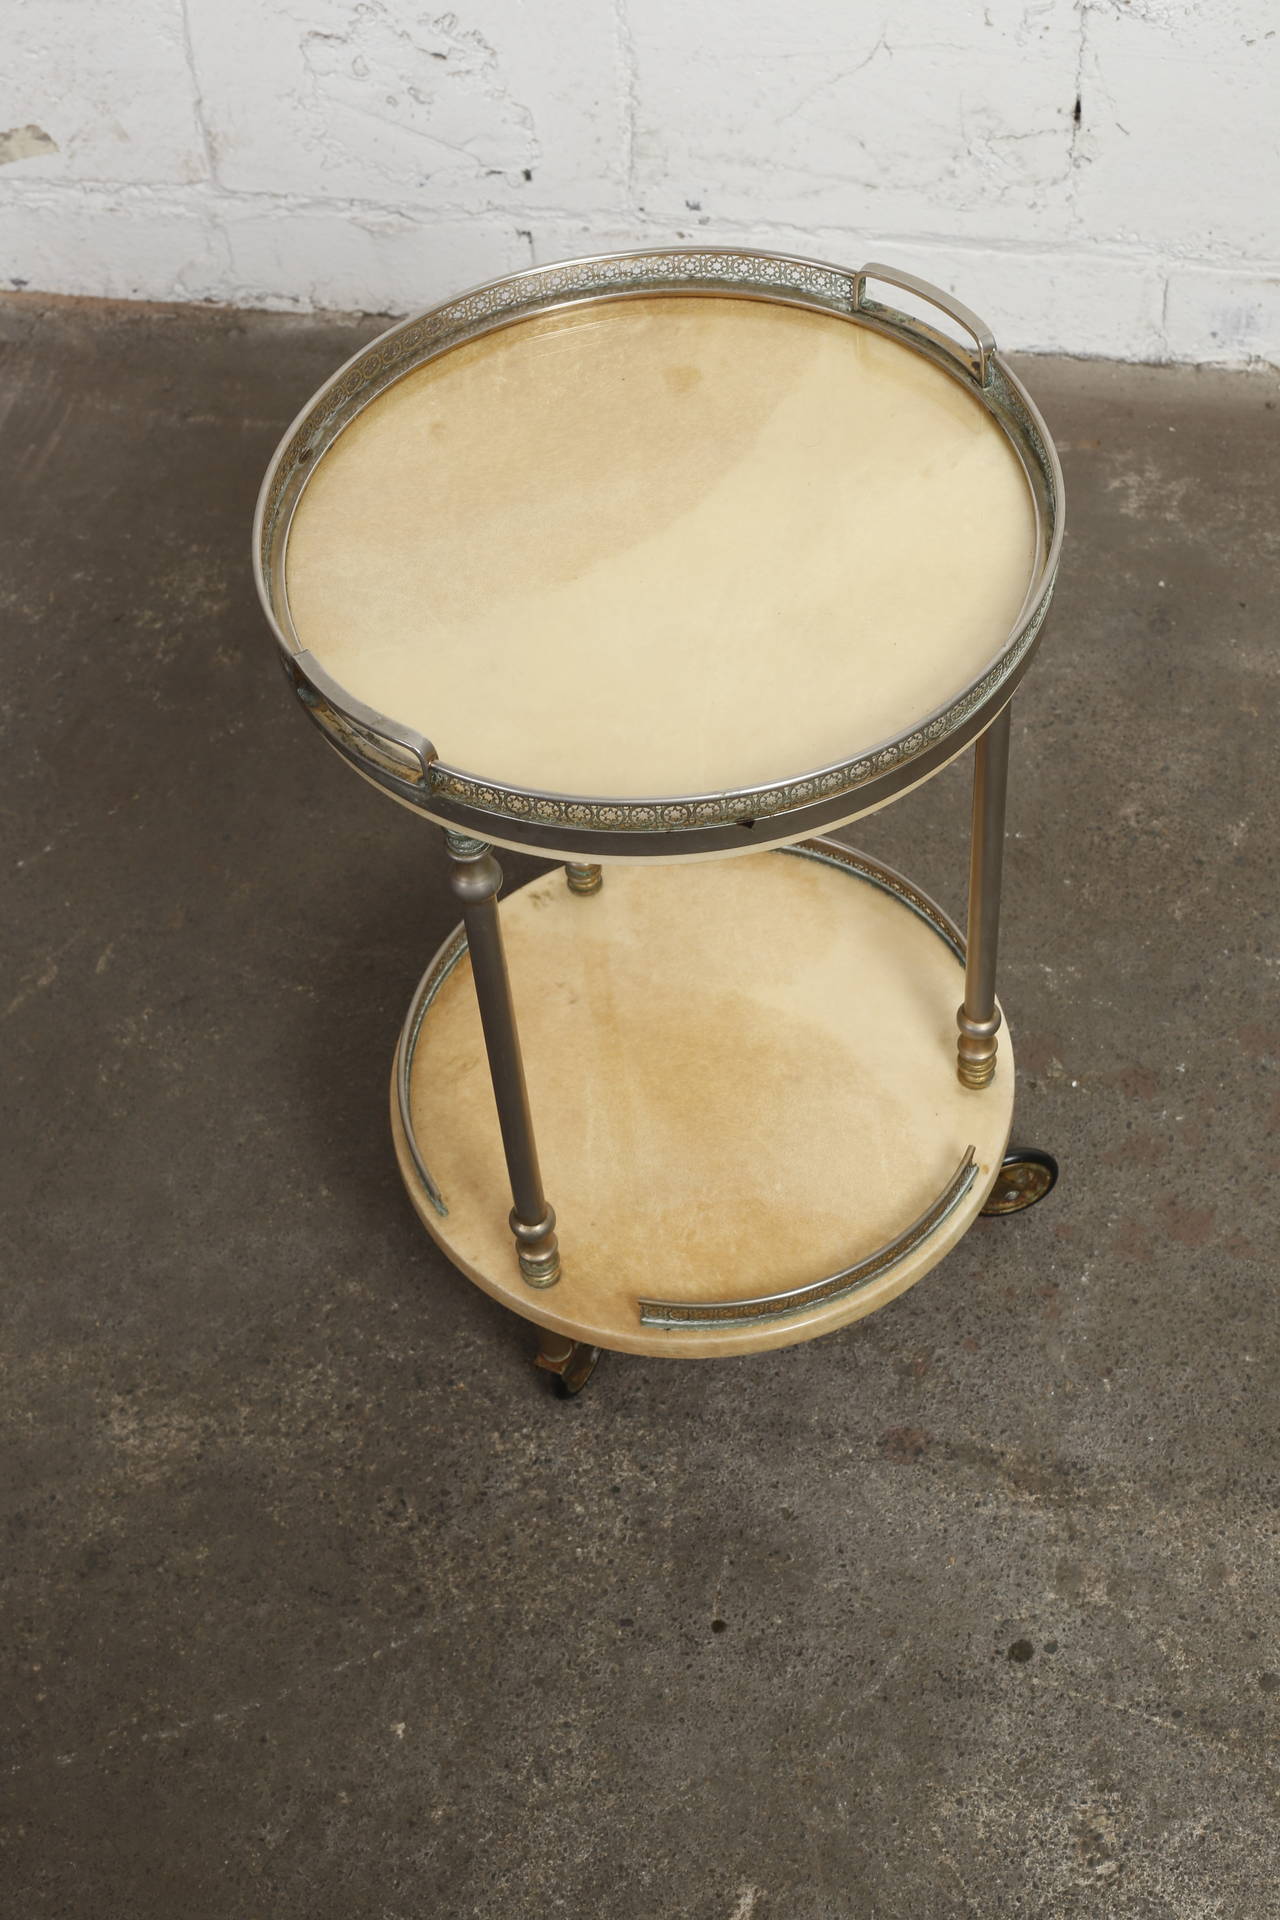 Petite goatskin bar cart with removable serving tray by Aldo Tura, Italy. Condition is excellent.

We offer free delivery to NYC and Philadelphia area. Delivery to DC, MD, CT, and MA are available if schedule permits please message for a